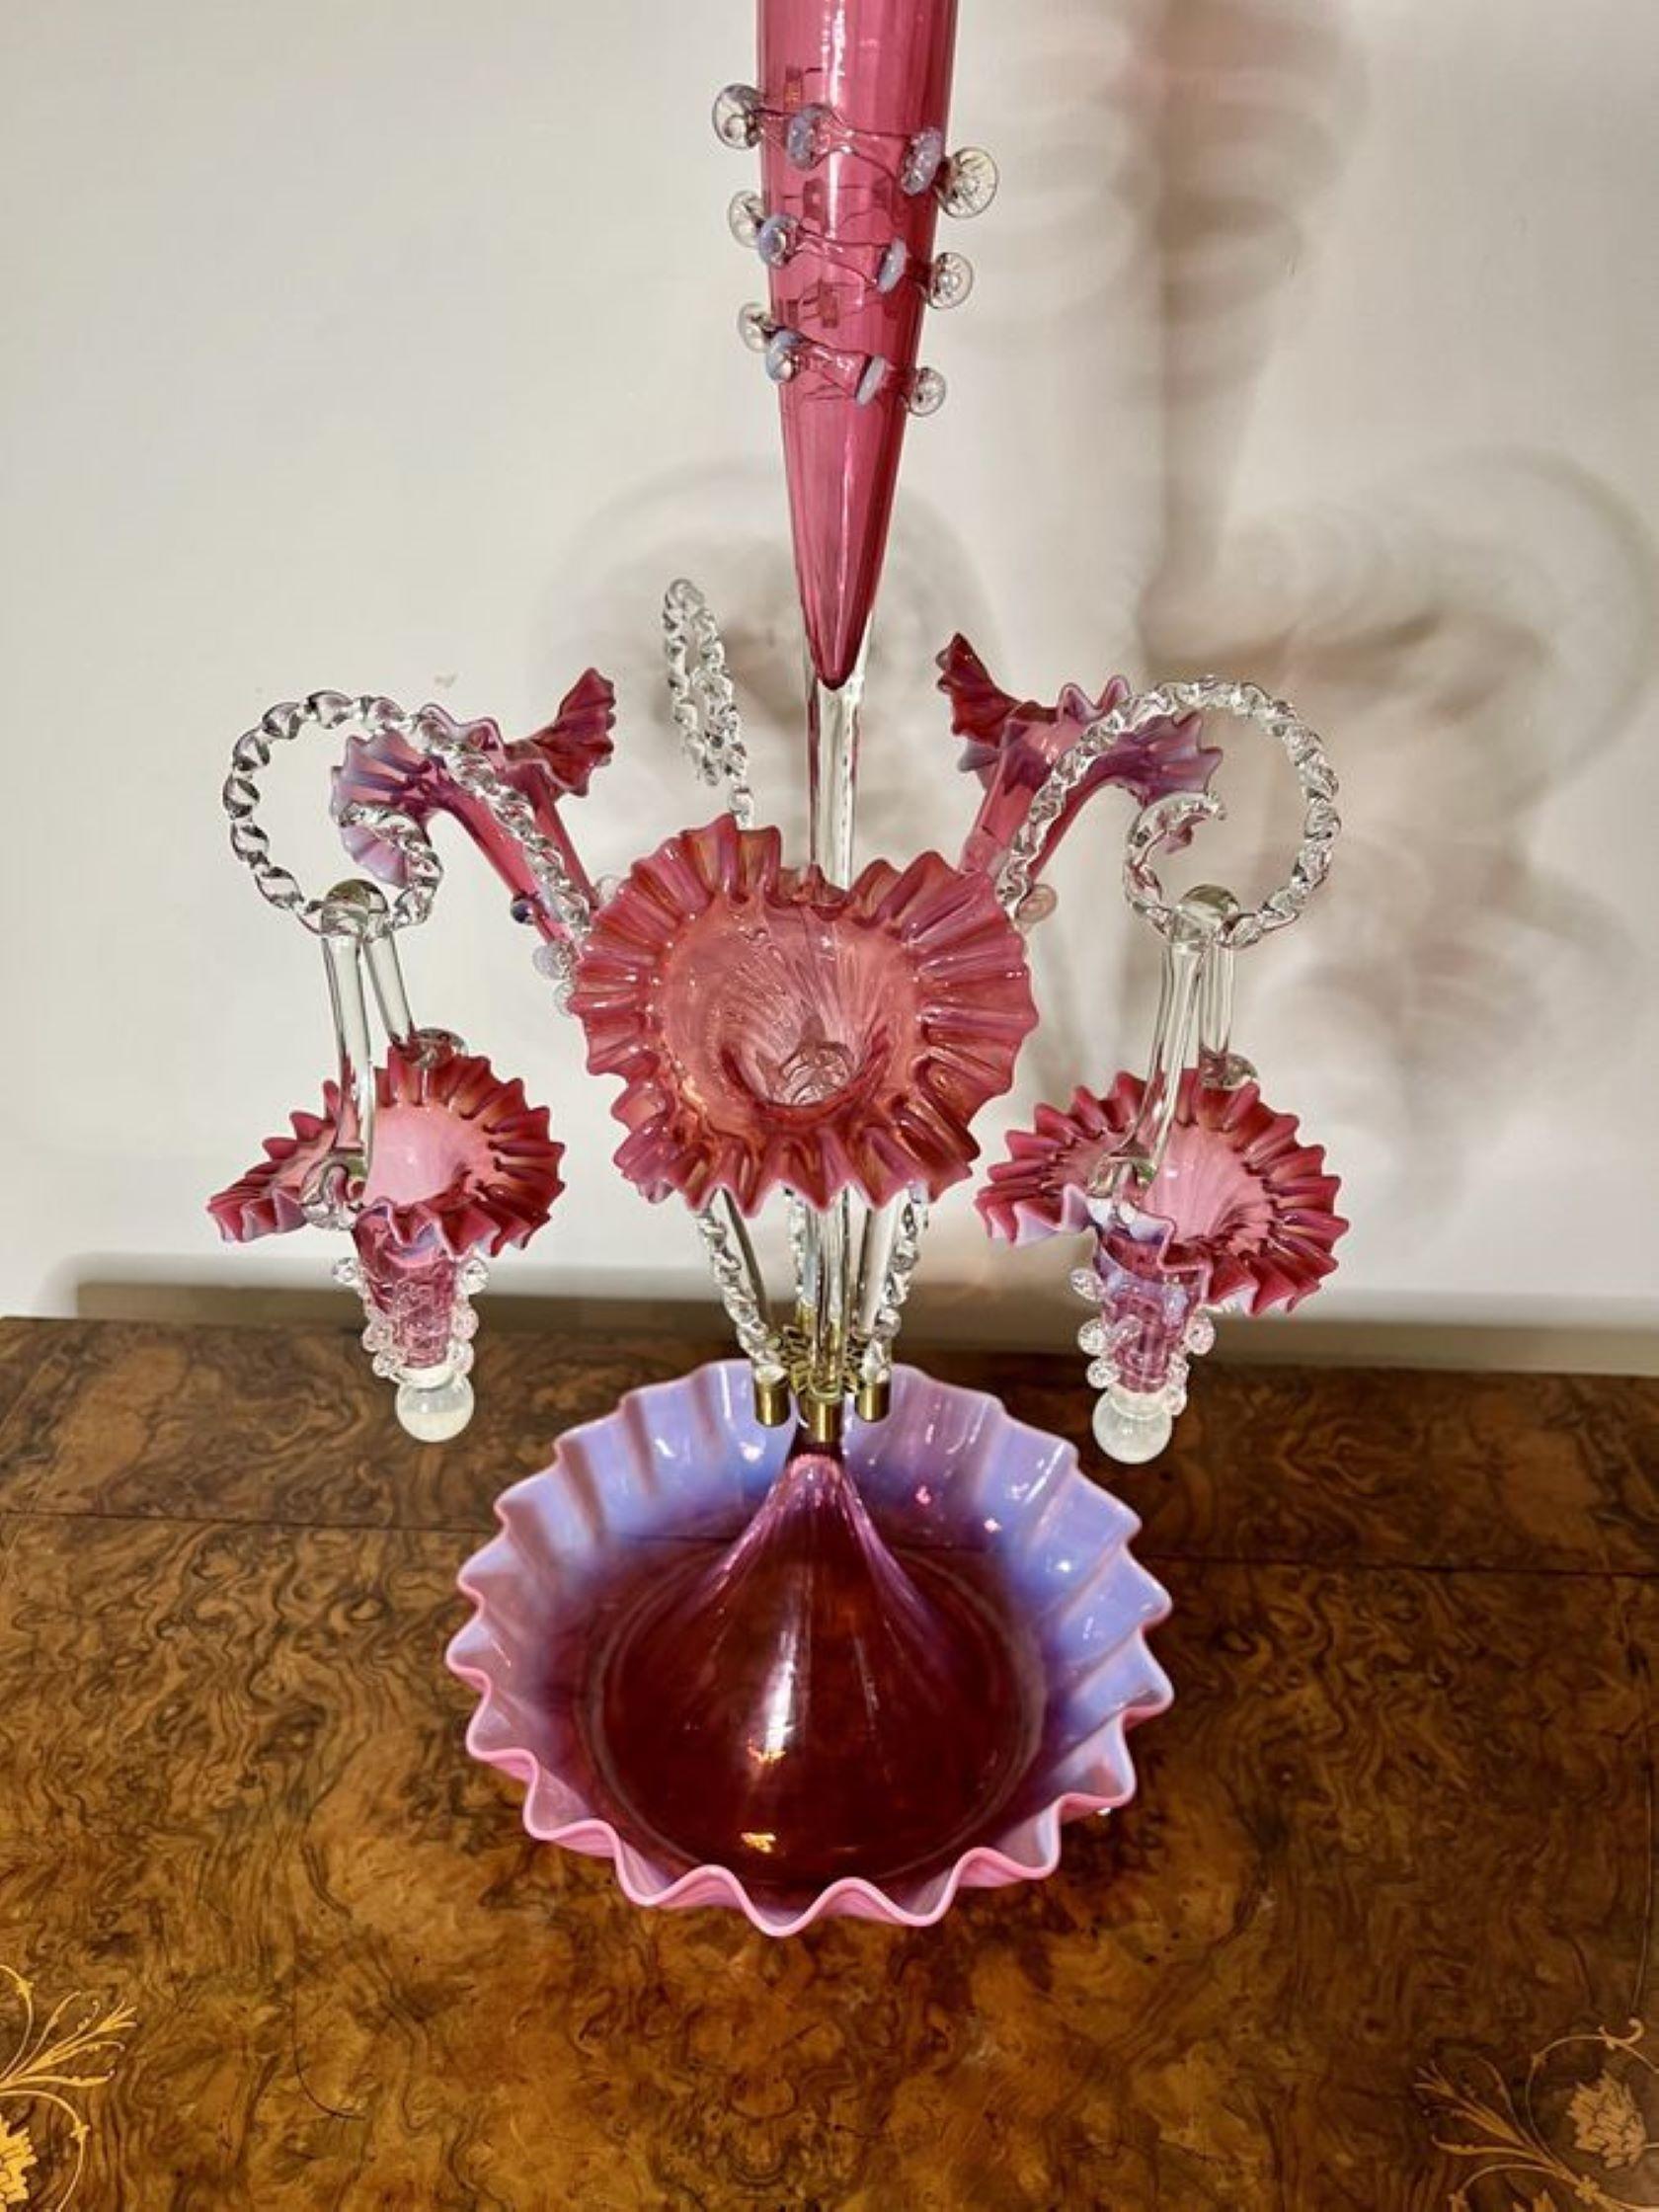 Outstanding quality large antique Victorian cranberry glass epergne having one tall trumpet to the centre, three smaller trumpet shaped flower holders and two hanging baskets on transparent shaped canes standing on a circular shaped wavy edge